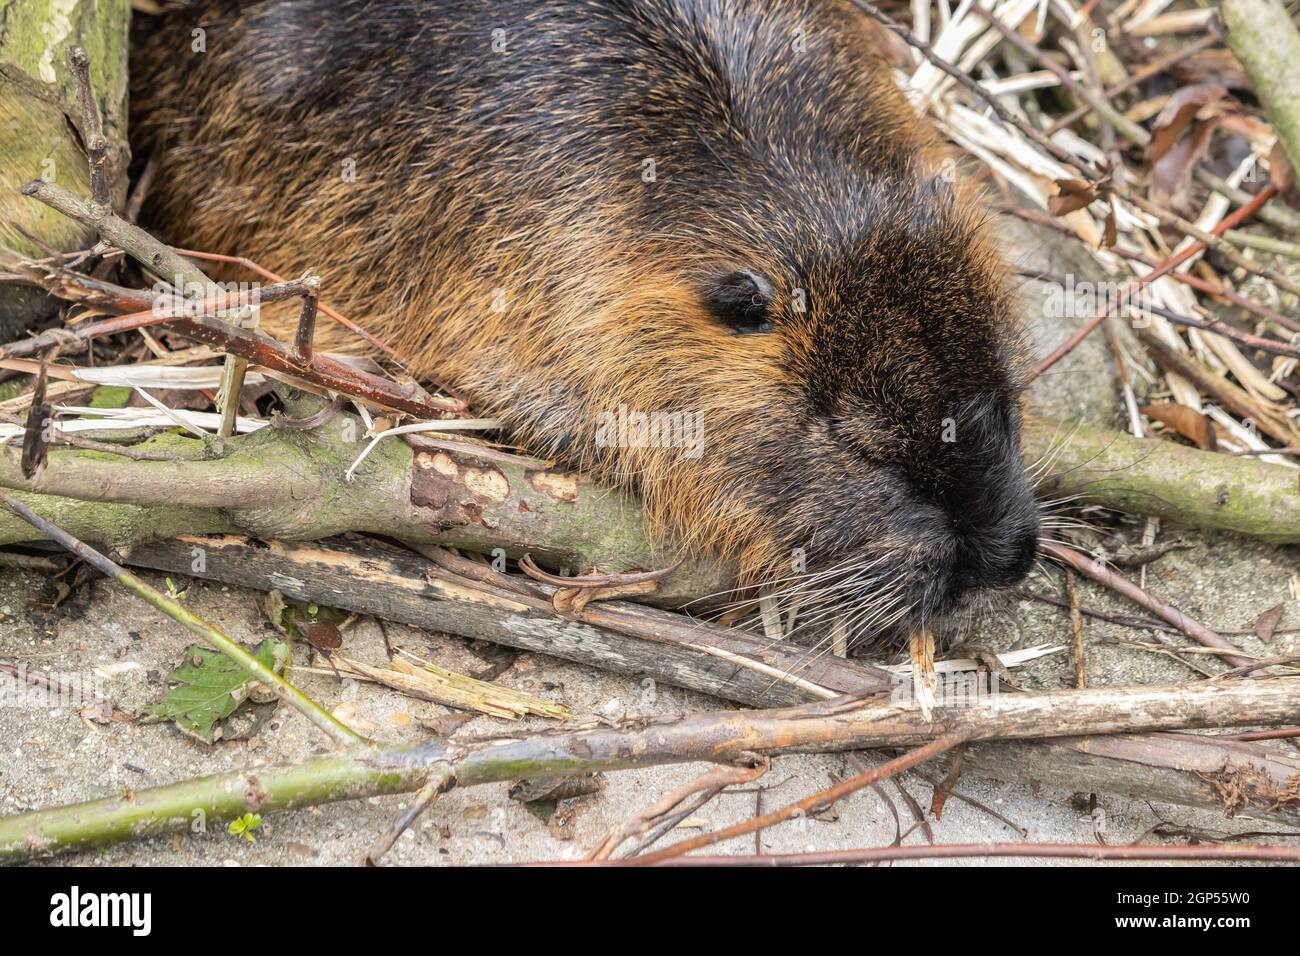 View of a cute beaver on the ground with the branches of a tree Stock Photo